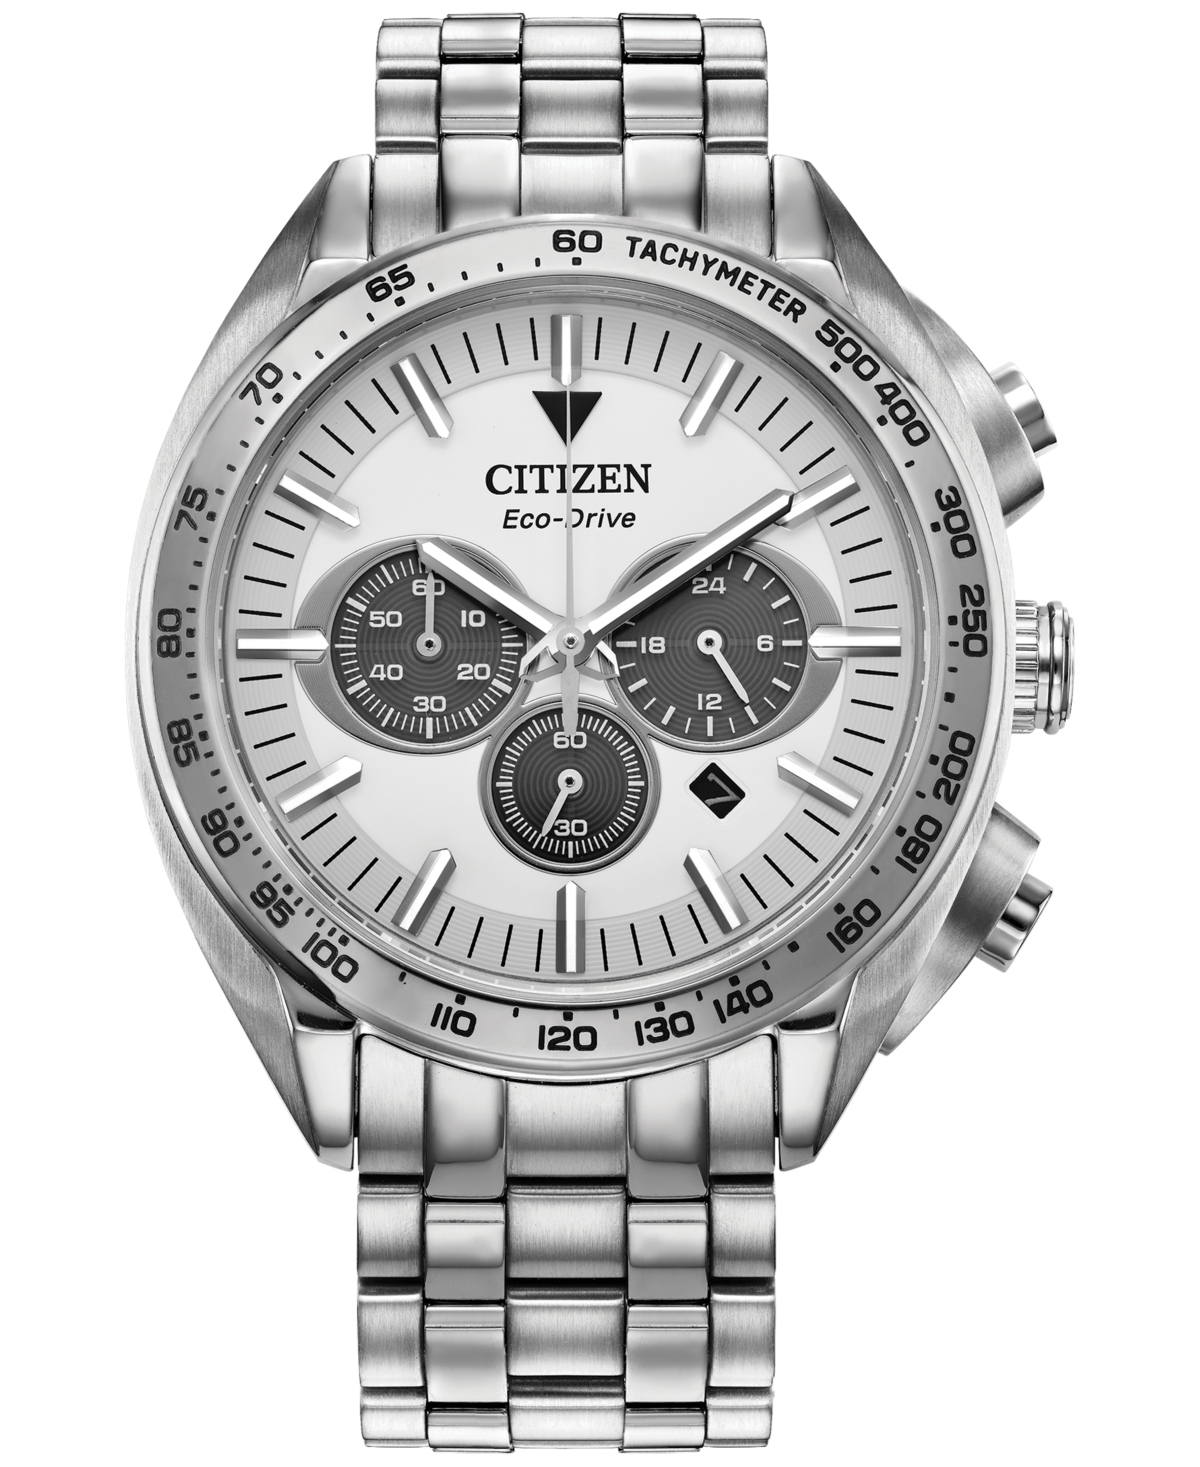 Citizen Eco-drive Men's Chronograph Sport Luxury Stainless Steel Bracelet Watch 43mm In White/silver